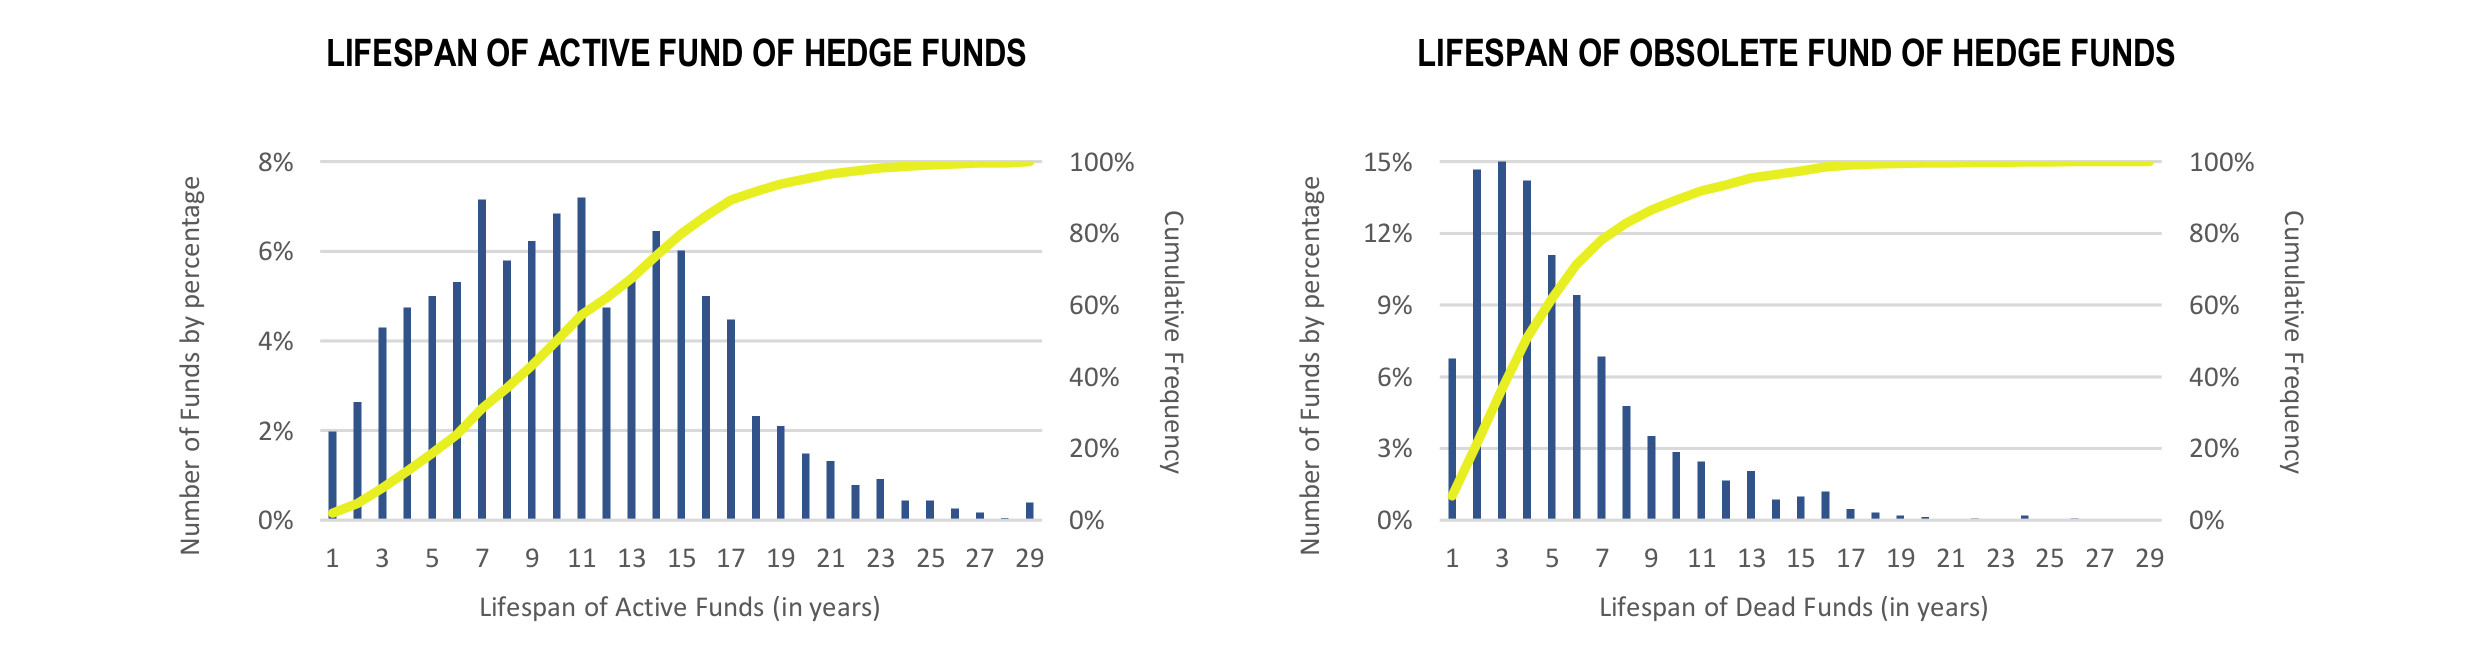 Fund of Hedge Funds Infographic June 2020 - lifespan of active and obsolete funds